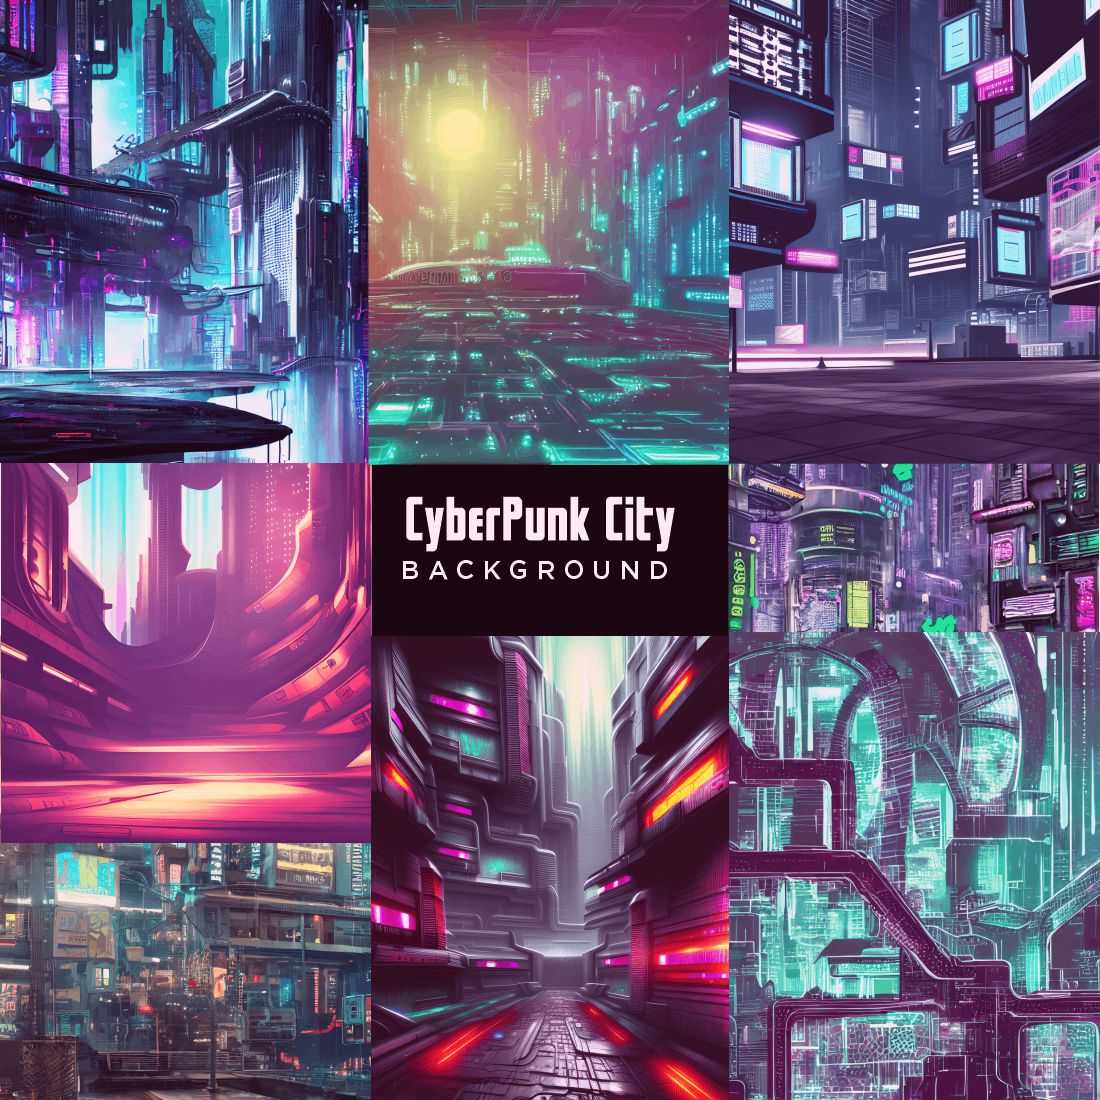 Cyberpunk City Background cover image.